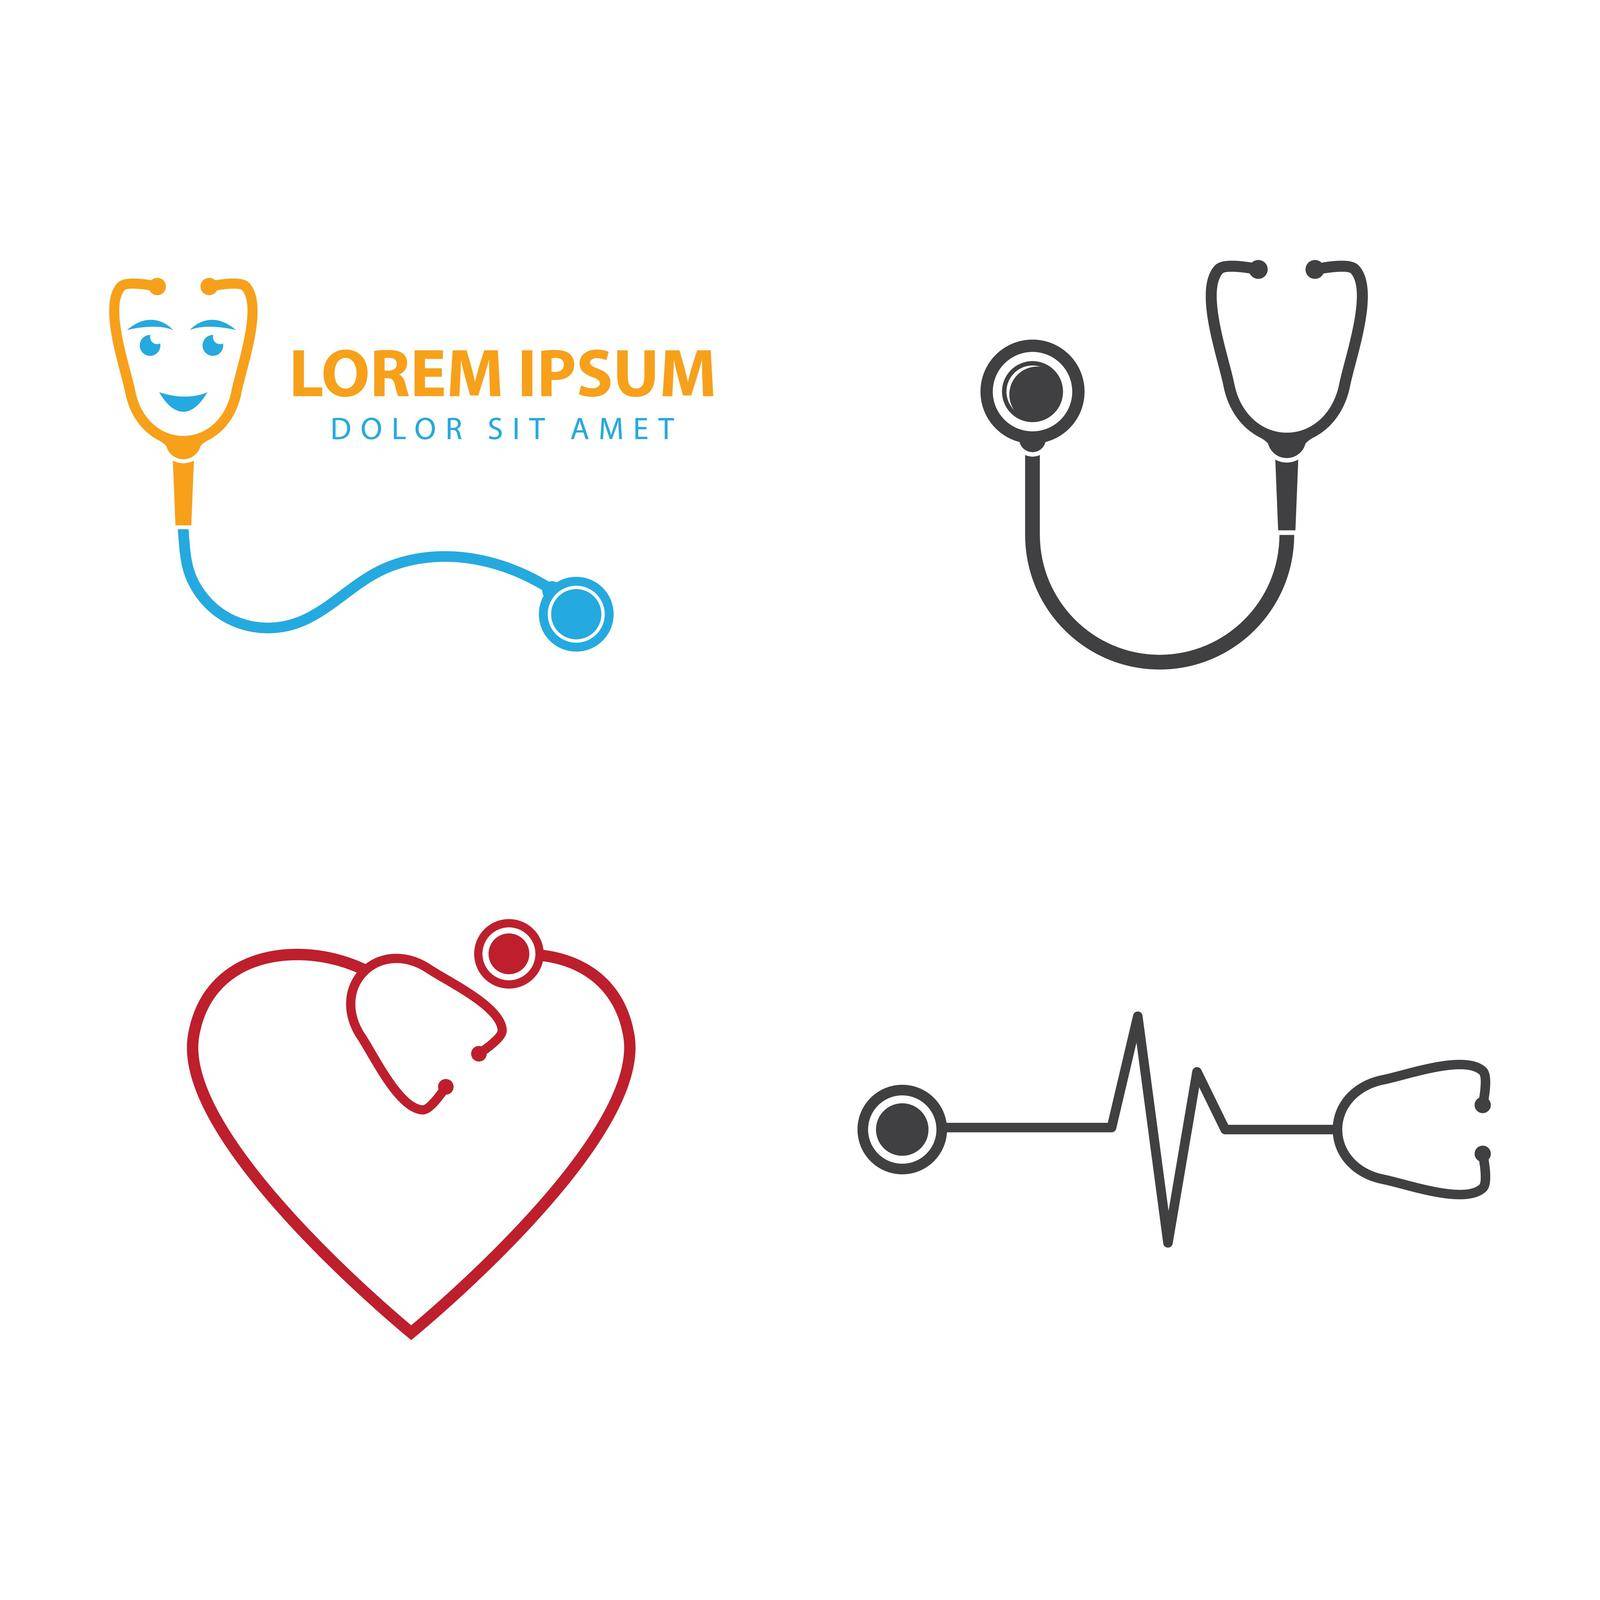 Stethoscope icon by awk